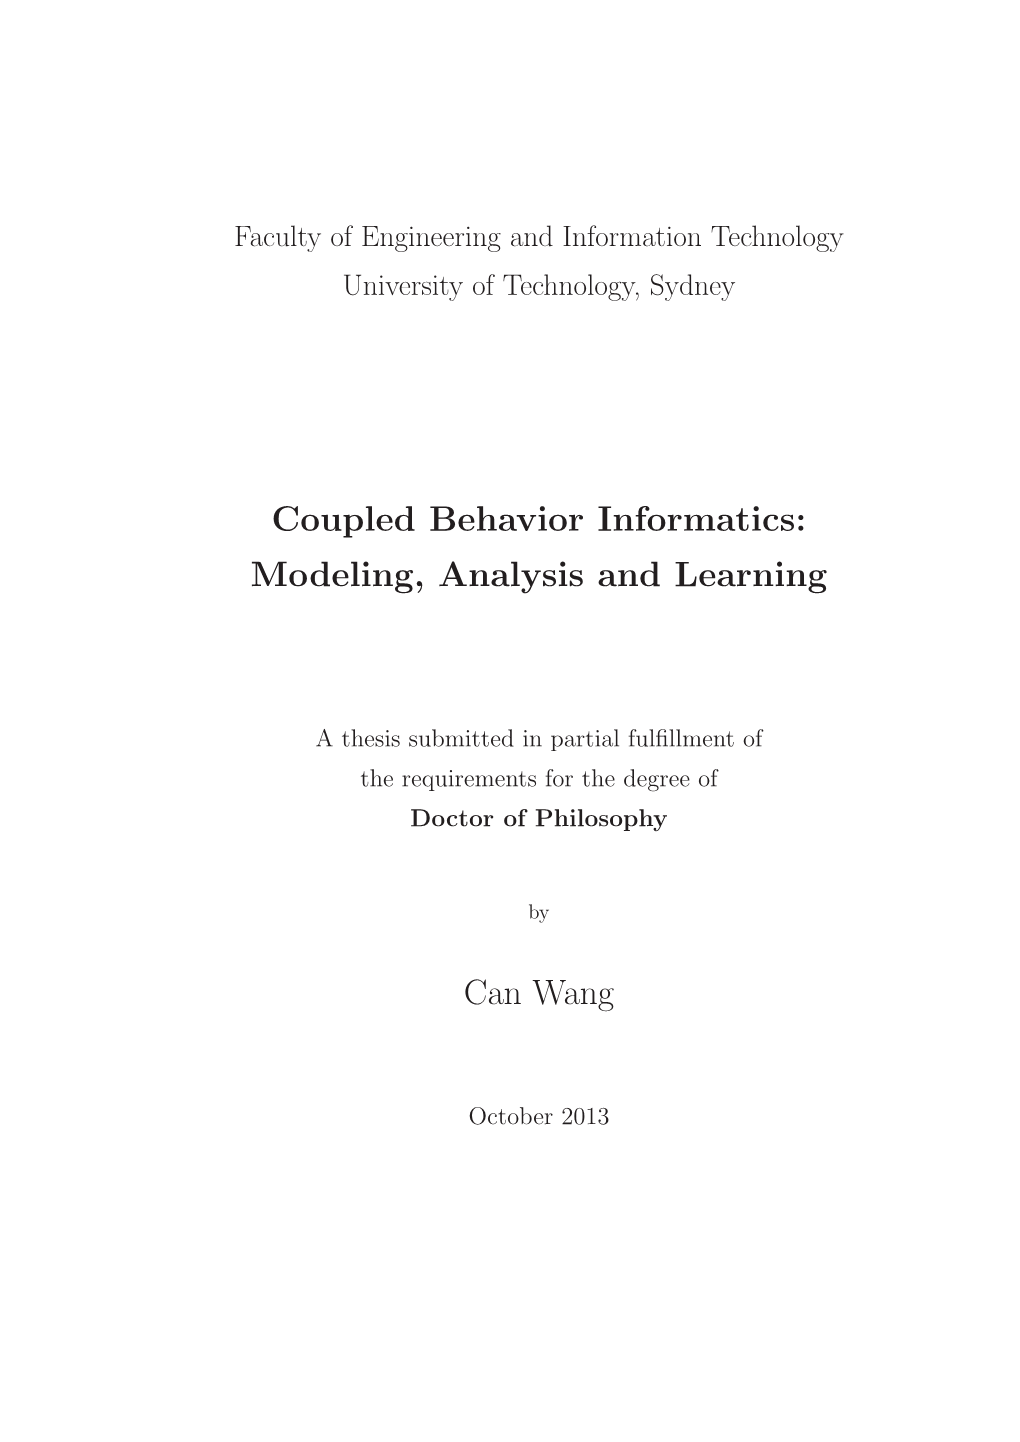 Coupled Behavior Informatics: Modeling, Analysis and Learning